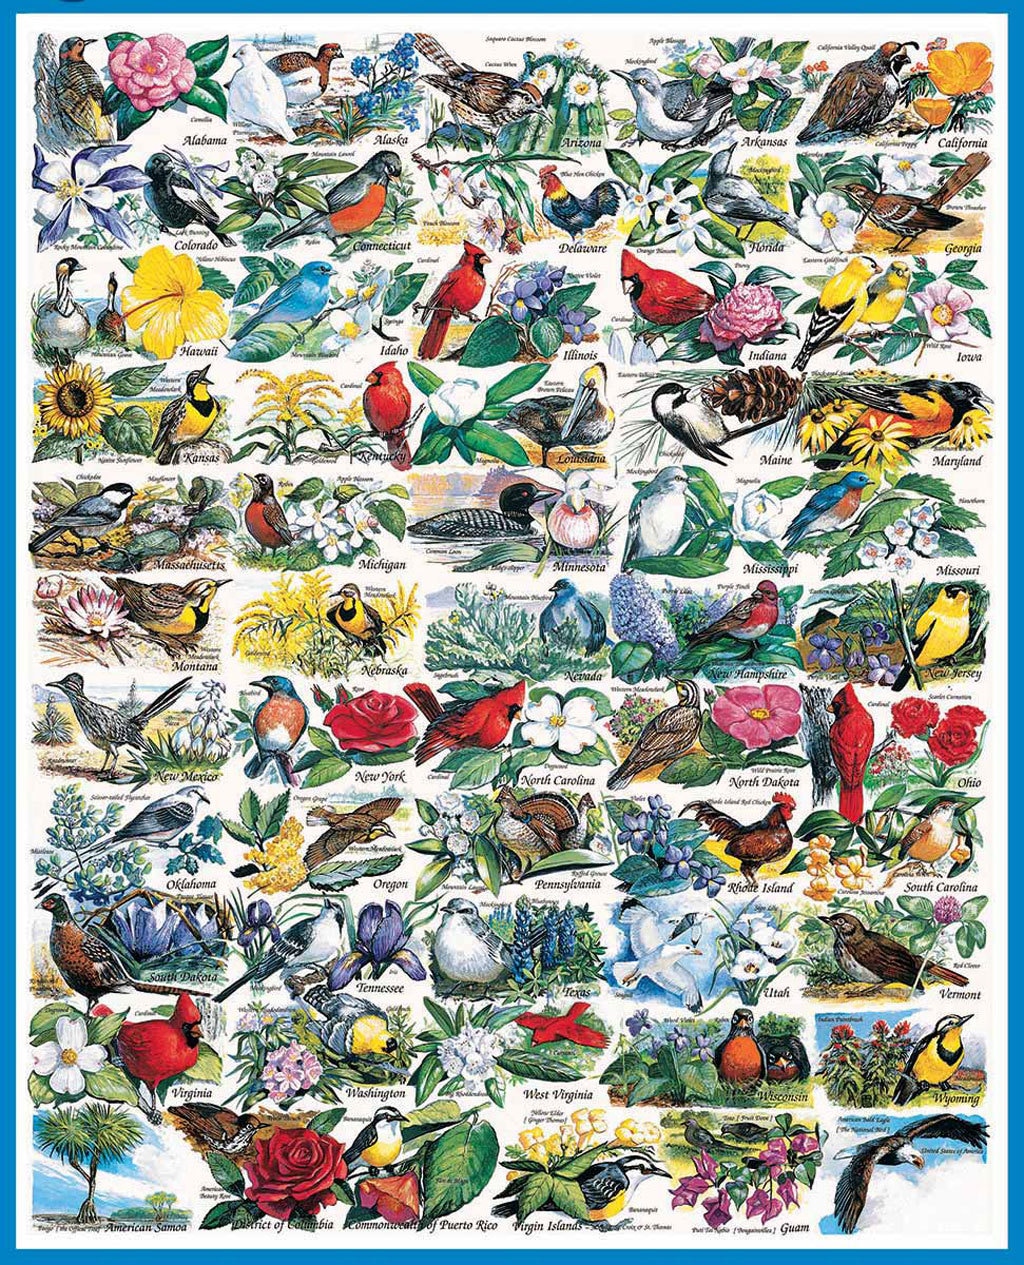 State Birds & Flowers - 1000pc Jigsaw Puzzle By White Mountain